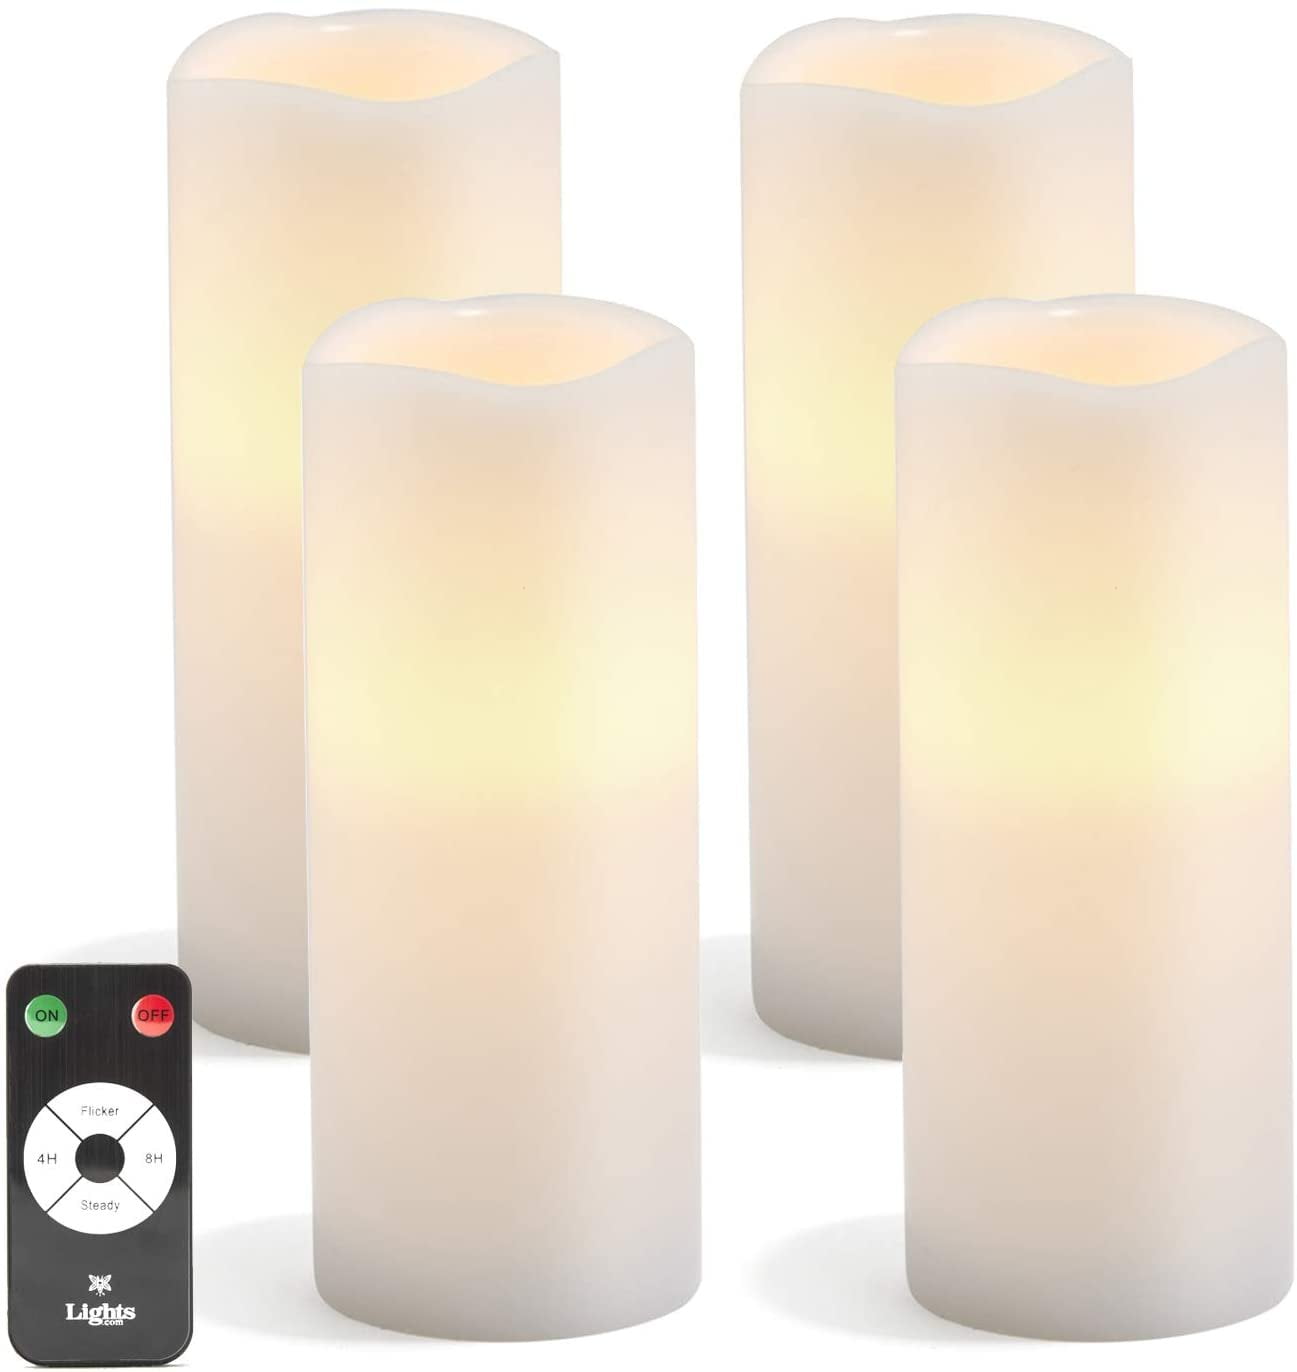 4x LED Flickering Flameless Taper Candles Light Battery Powered Remote Control